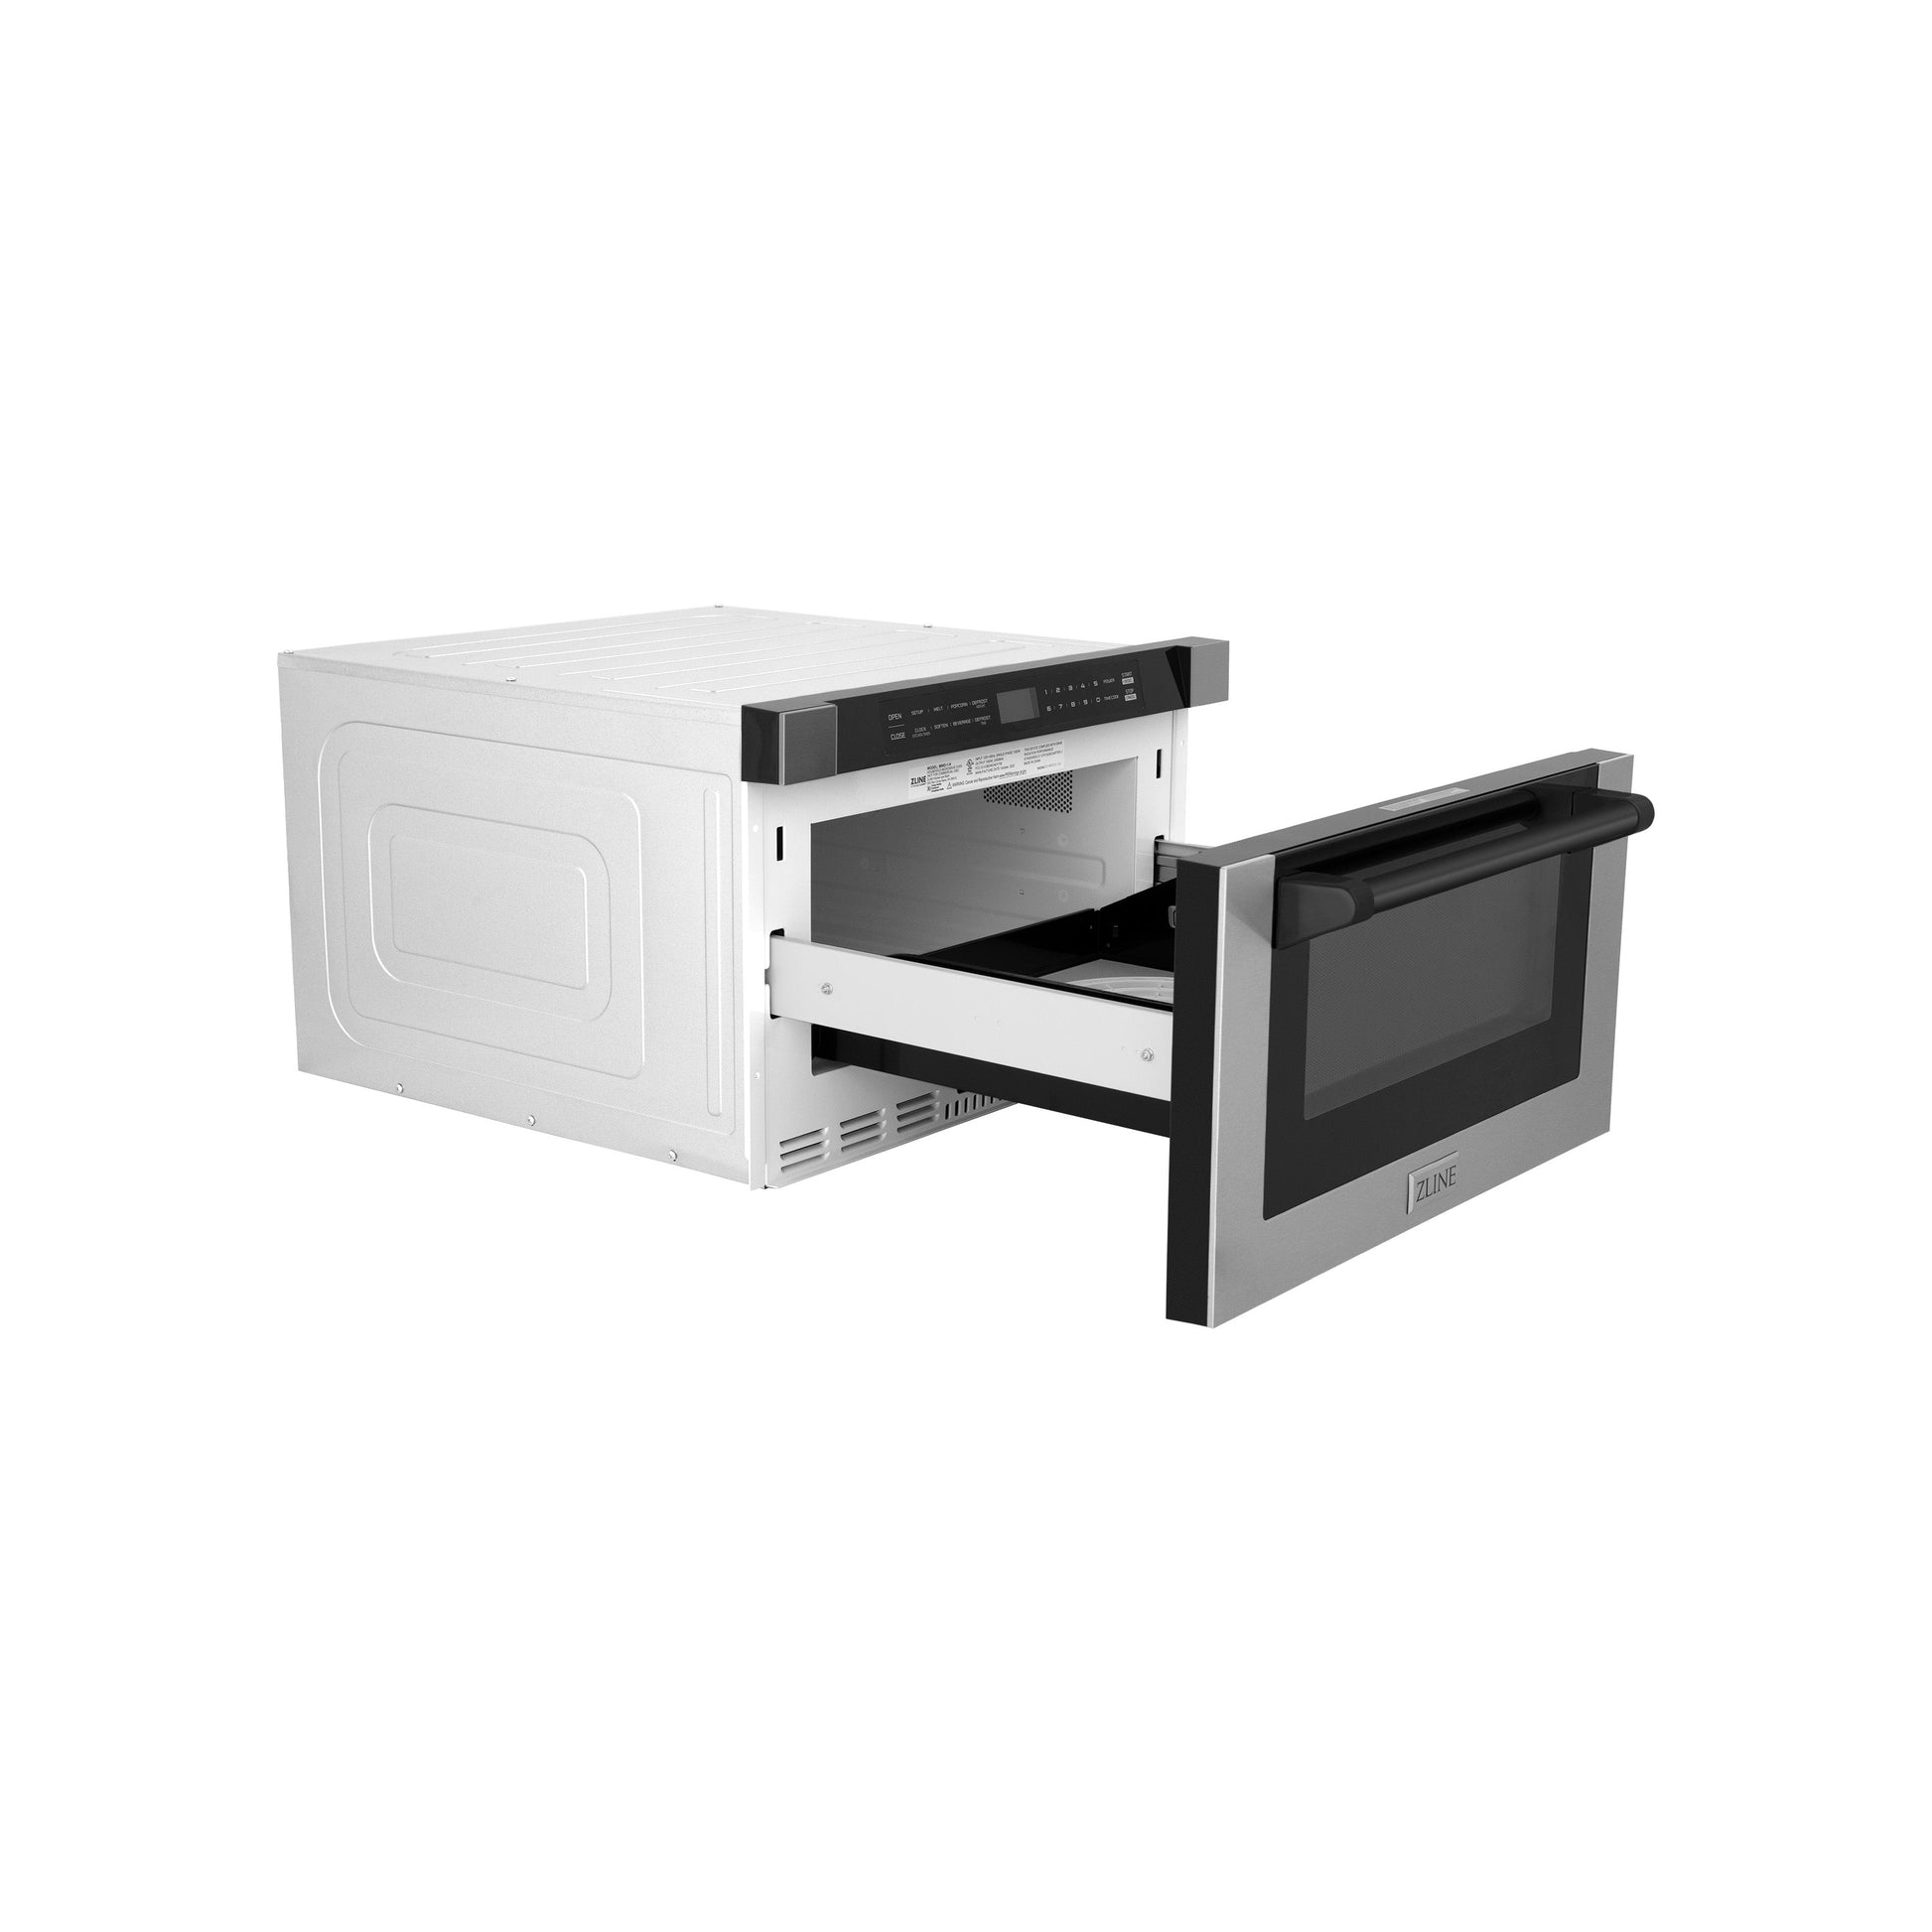 ZLINE Autograph Edition 24" Built-in Microwave Drawer - Traditional Handle in Stainless Steel with Accents